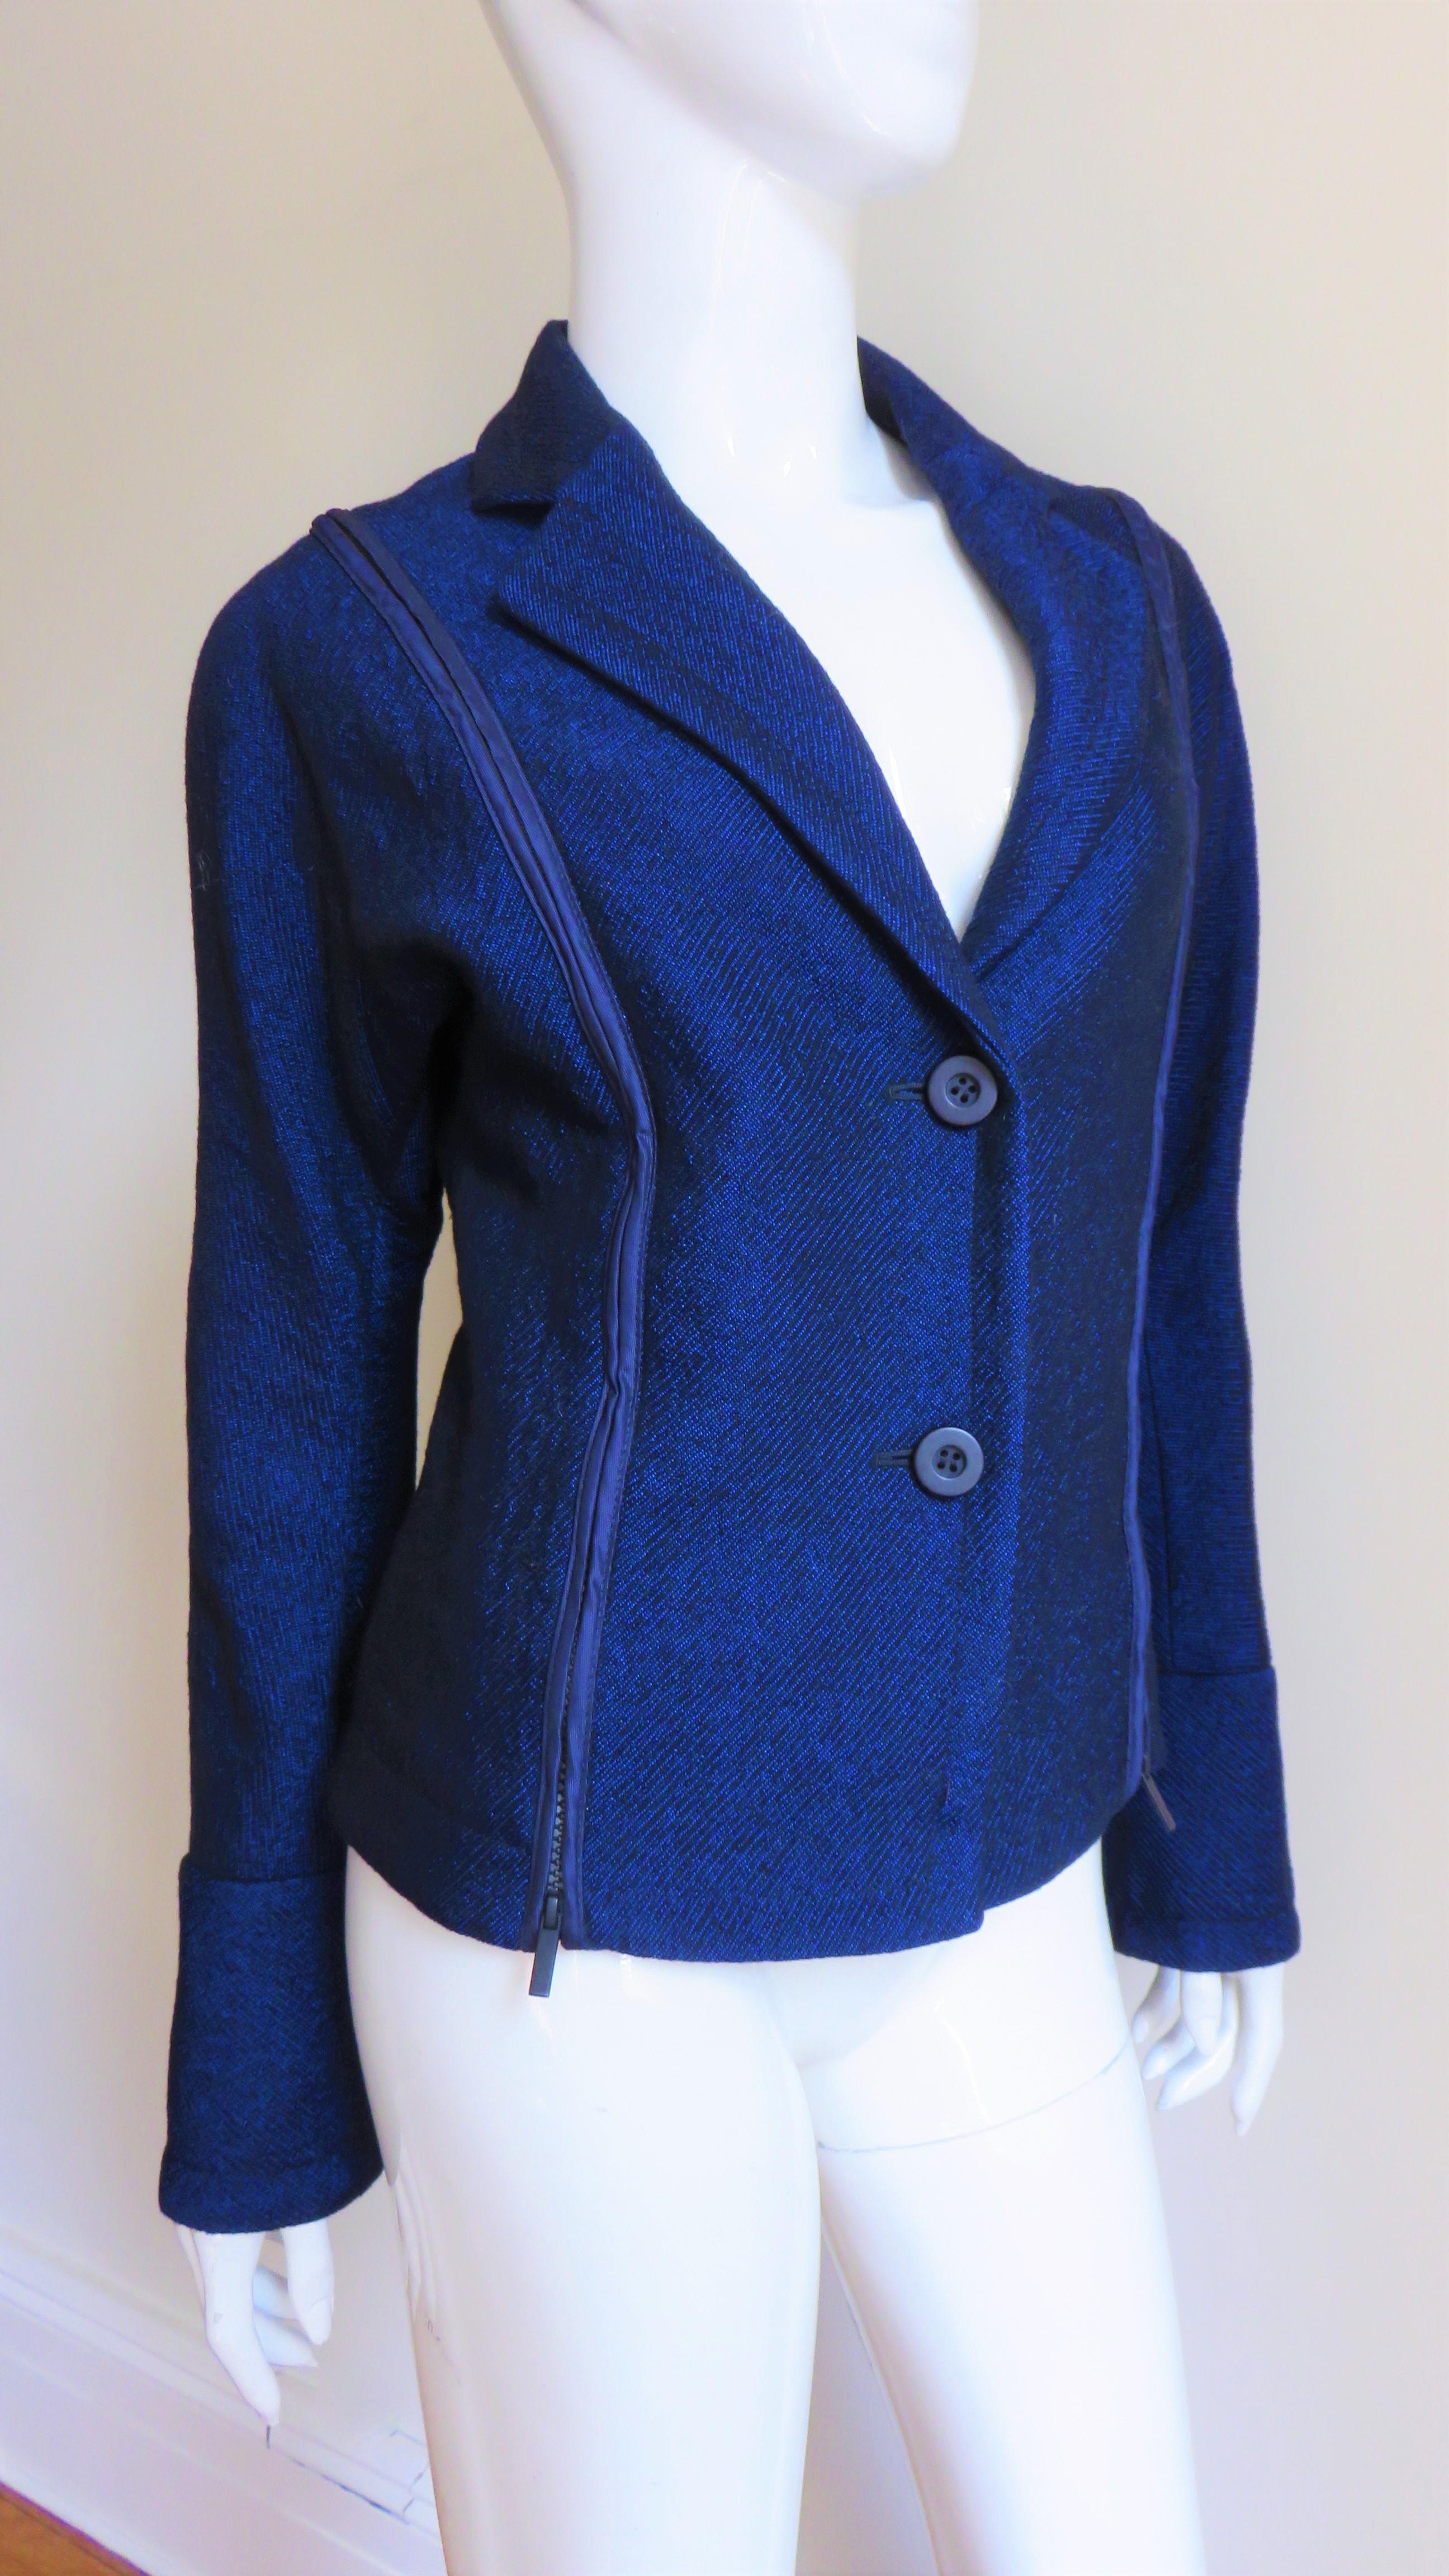 A fabulous bright blue wool jacket by Issey Miyake. It has a lapel collar, black button front closure, long dolman sleeves with zipper cuffs and fabulous vertical zippers along each side of the front and back which open to reveal matching nylon